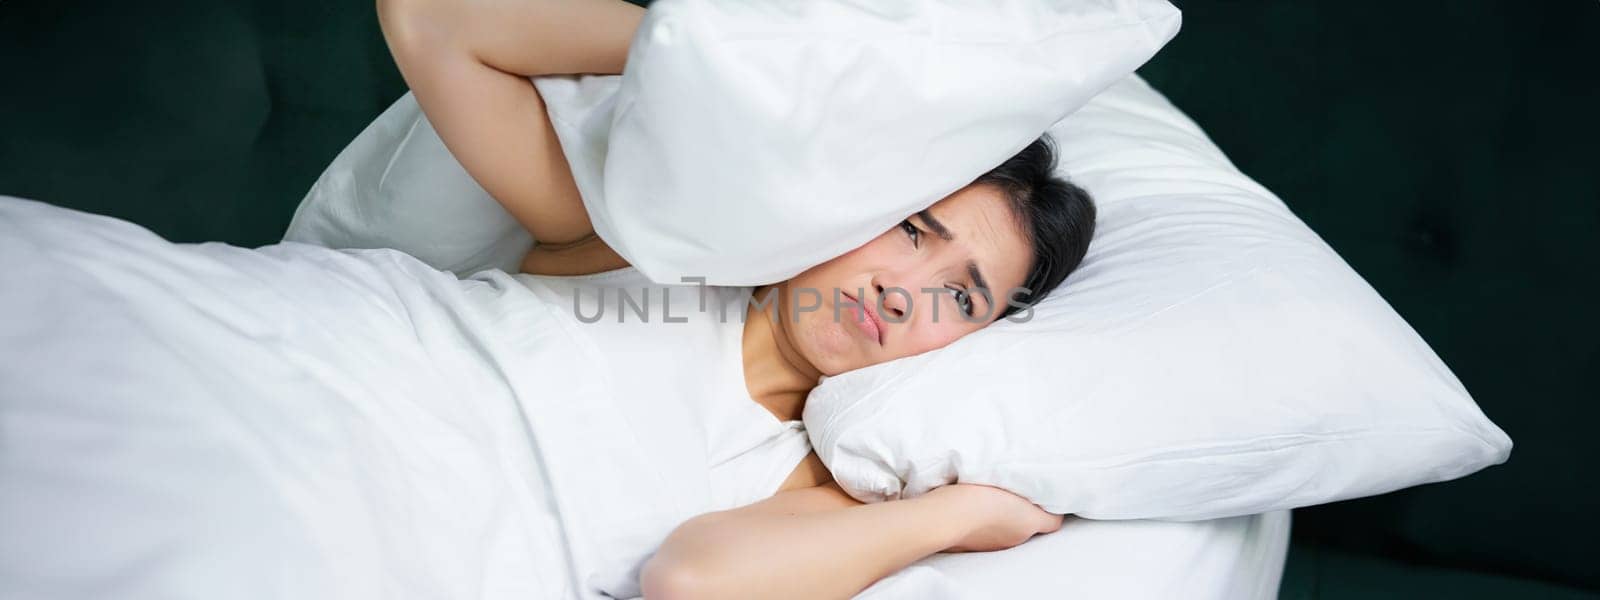 Sad girl with insomnia. Young asian woman lying in bed, cover her ears with pillow, cant sleep, partner snors, loud noise at night disturbing her.